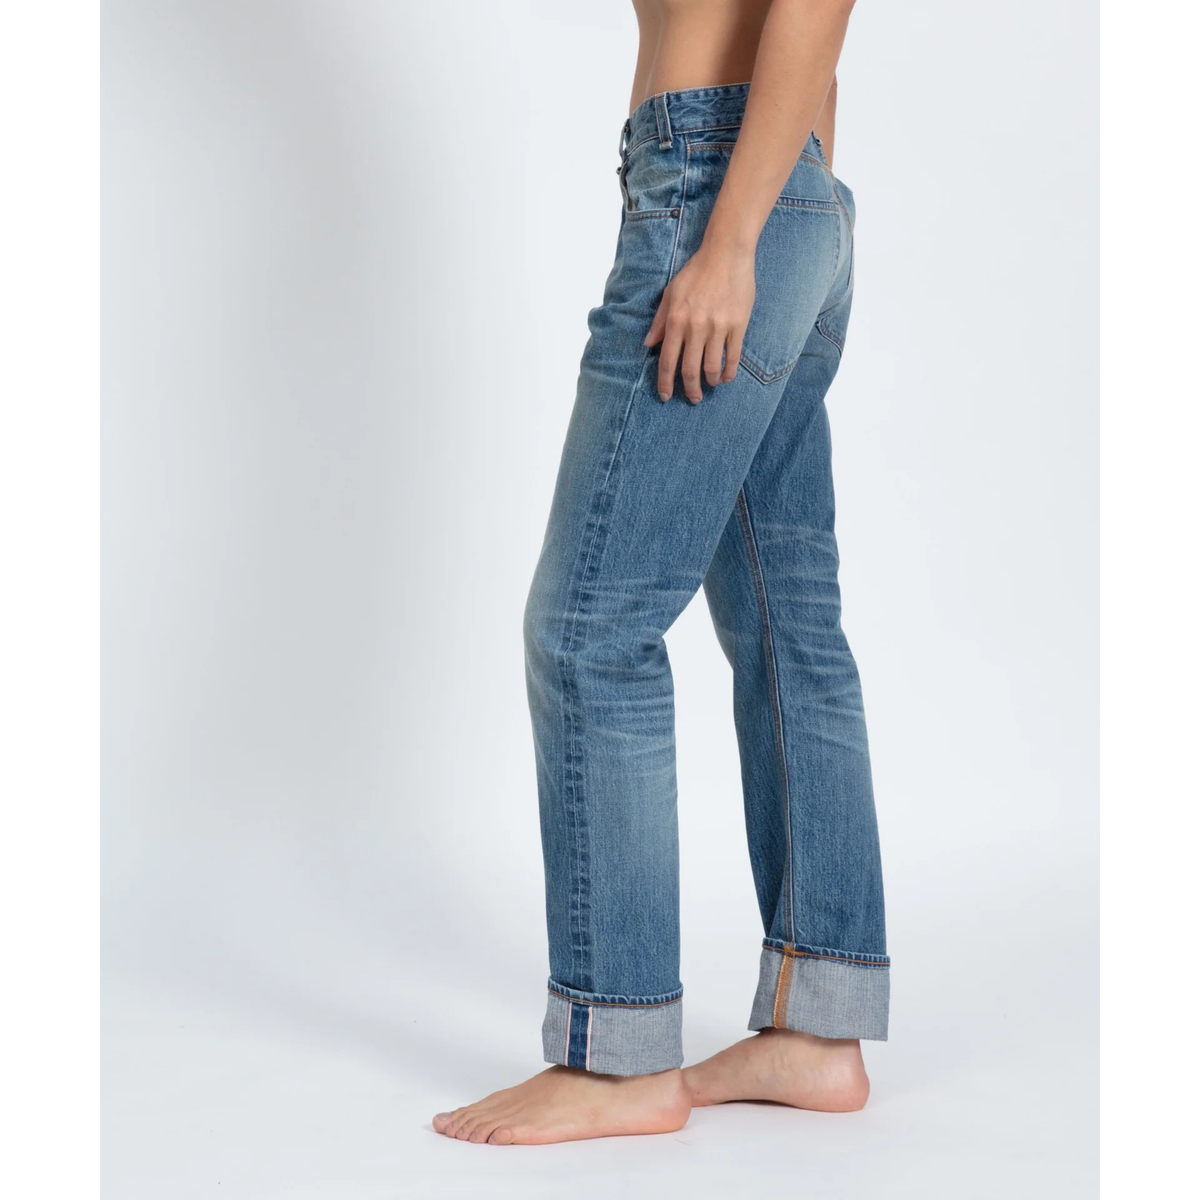 Selvage Jean - Chill